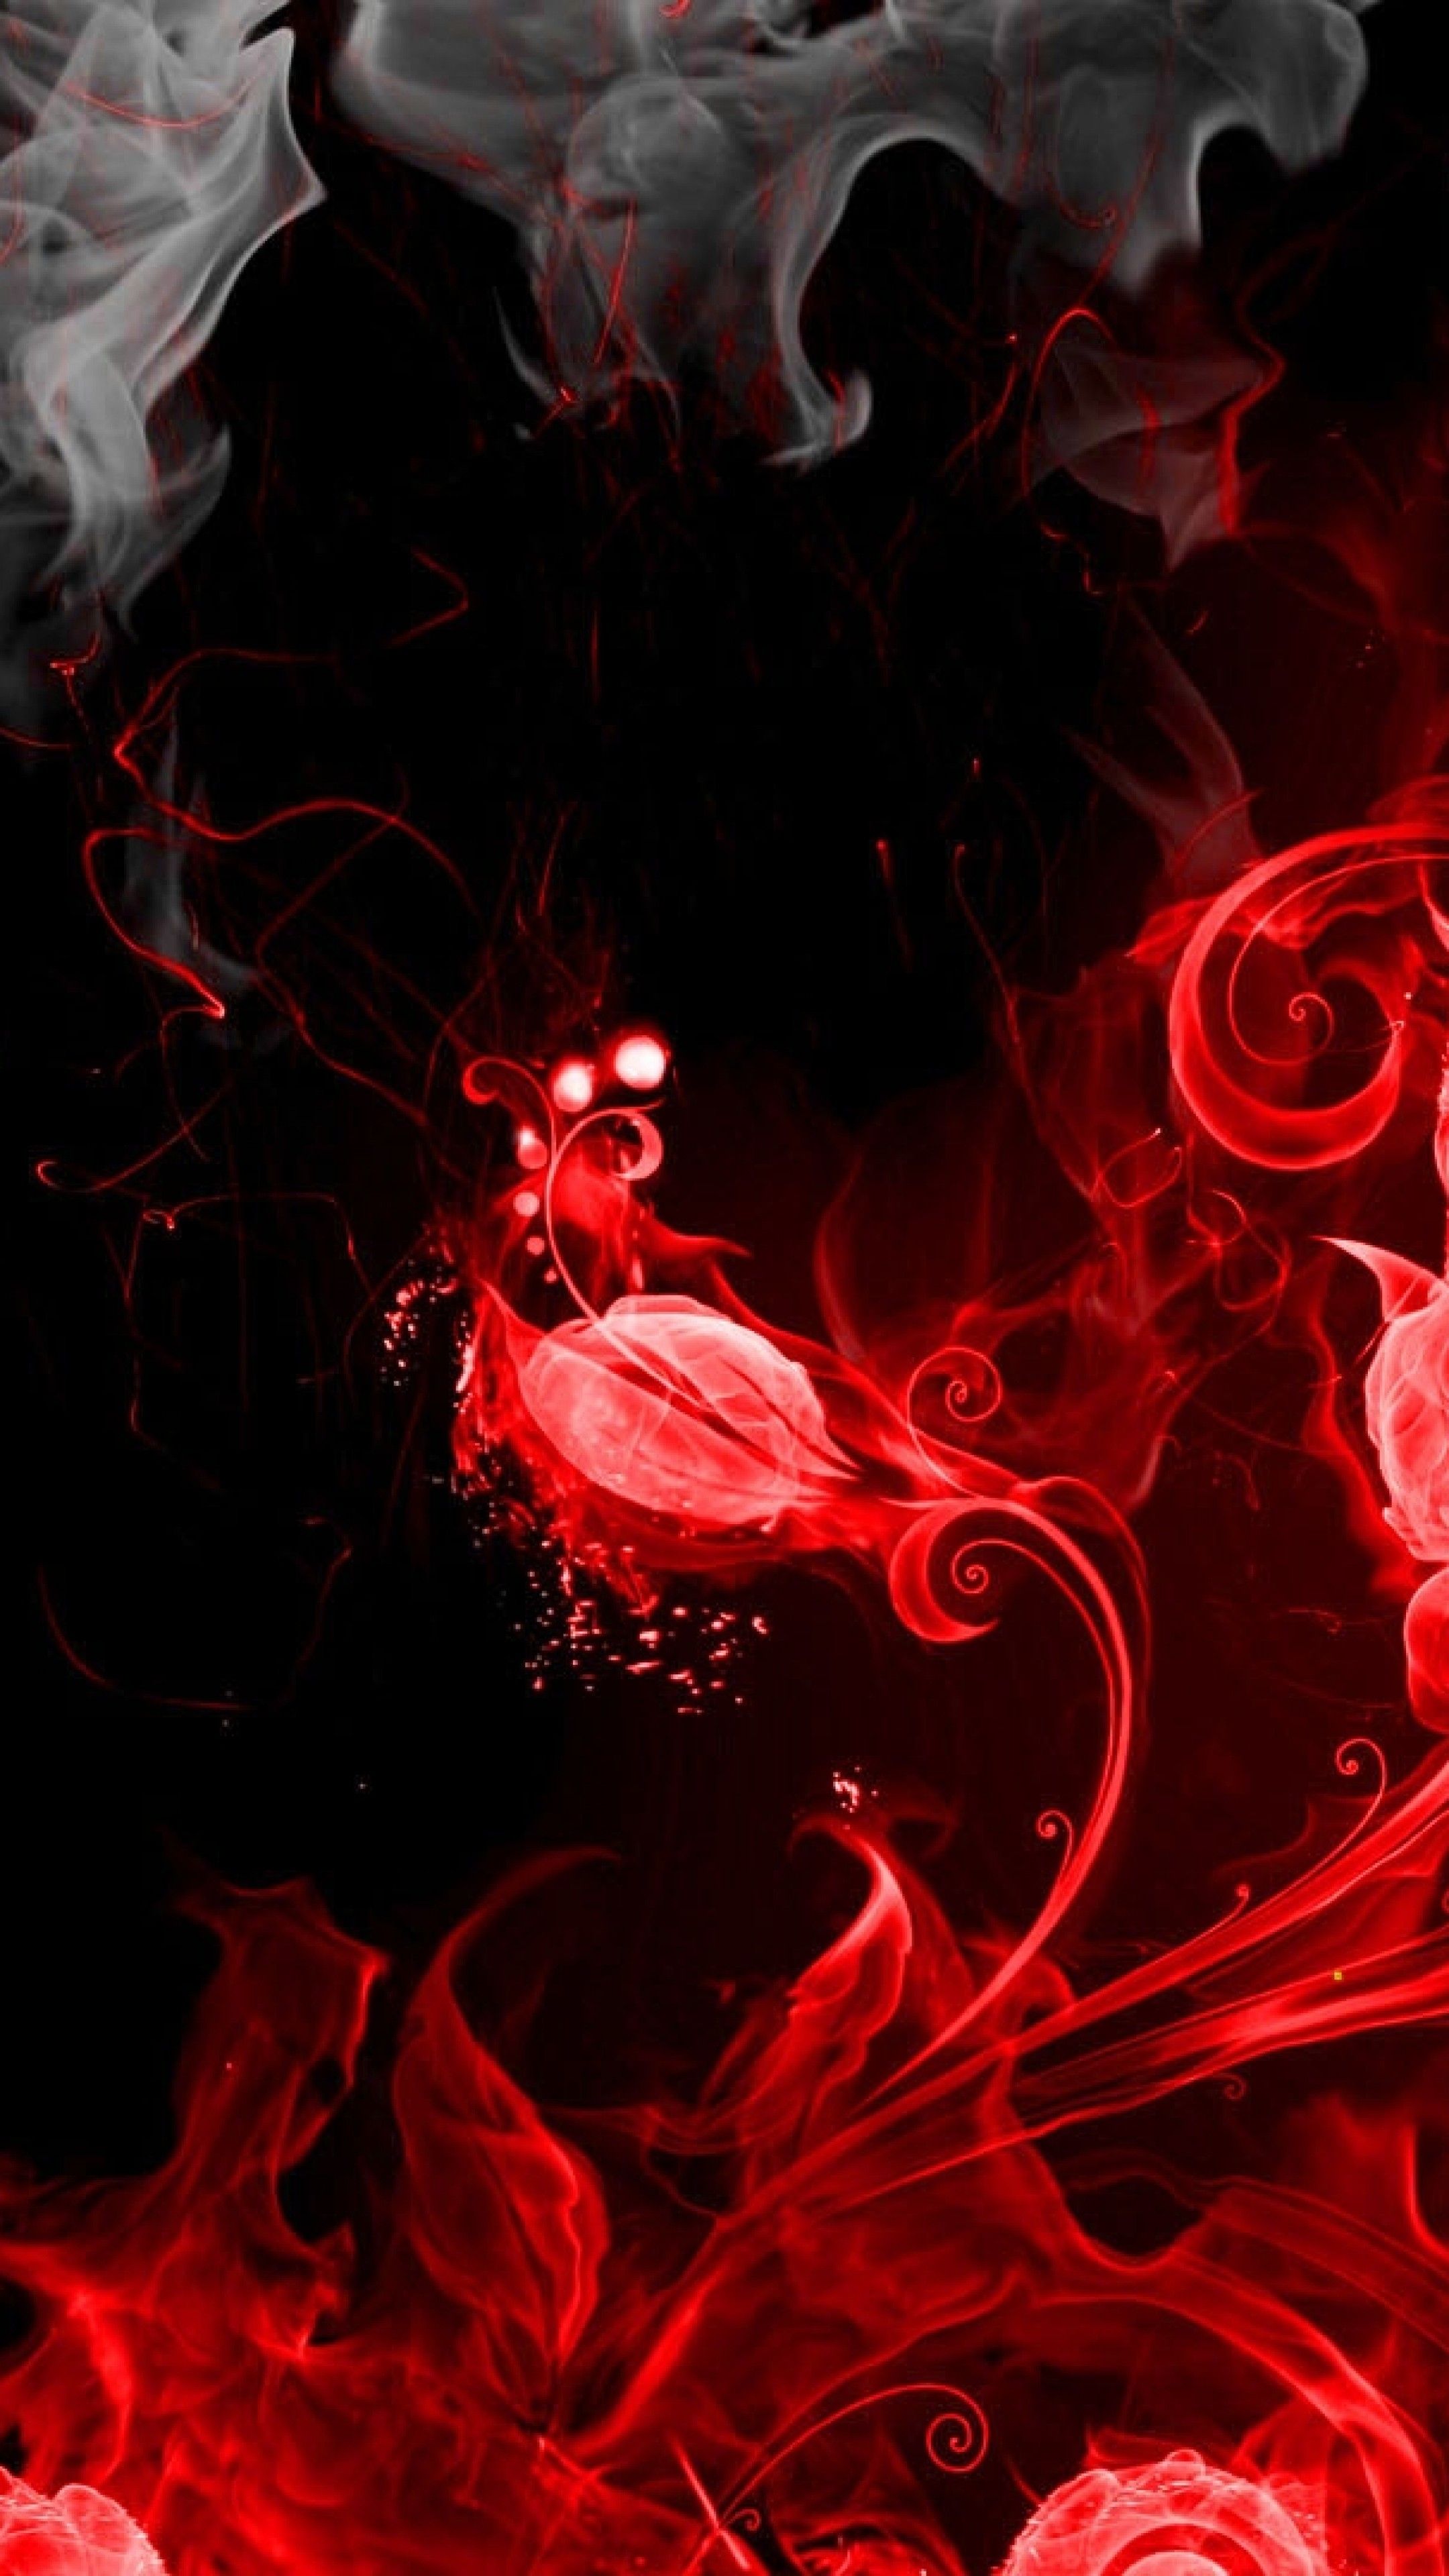 4k Wallpaper Red And Black